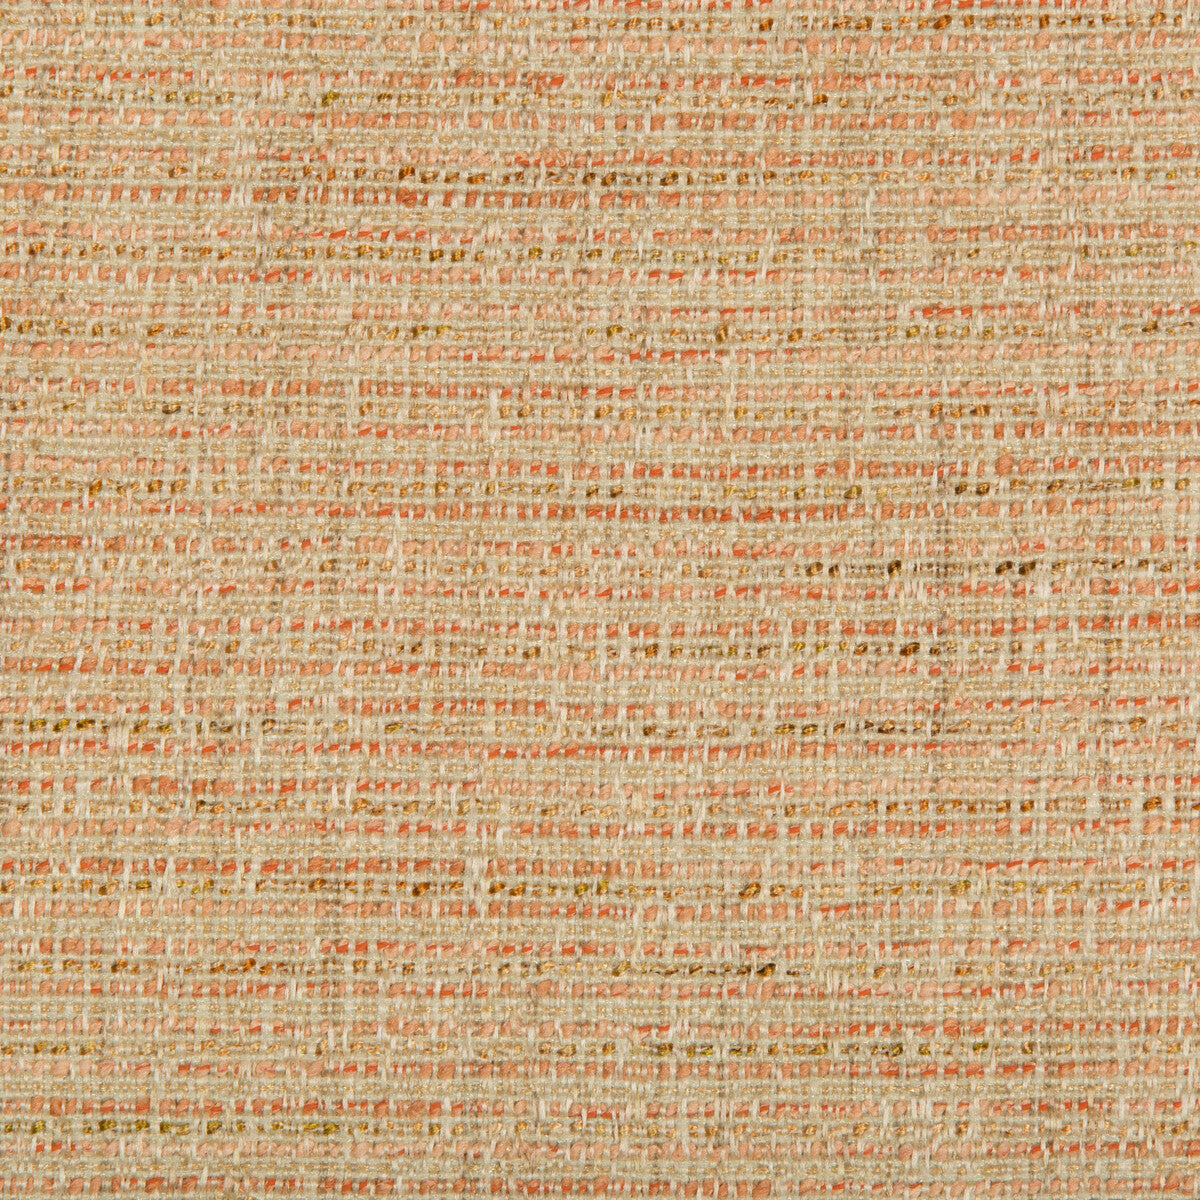 Kravet Contract fabric in 35410-12 color - pattern 35410.12.0 - by Kravet Contract in the Crypton Incase collection